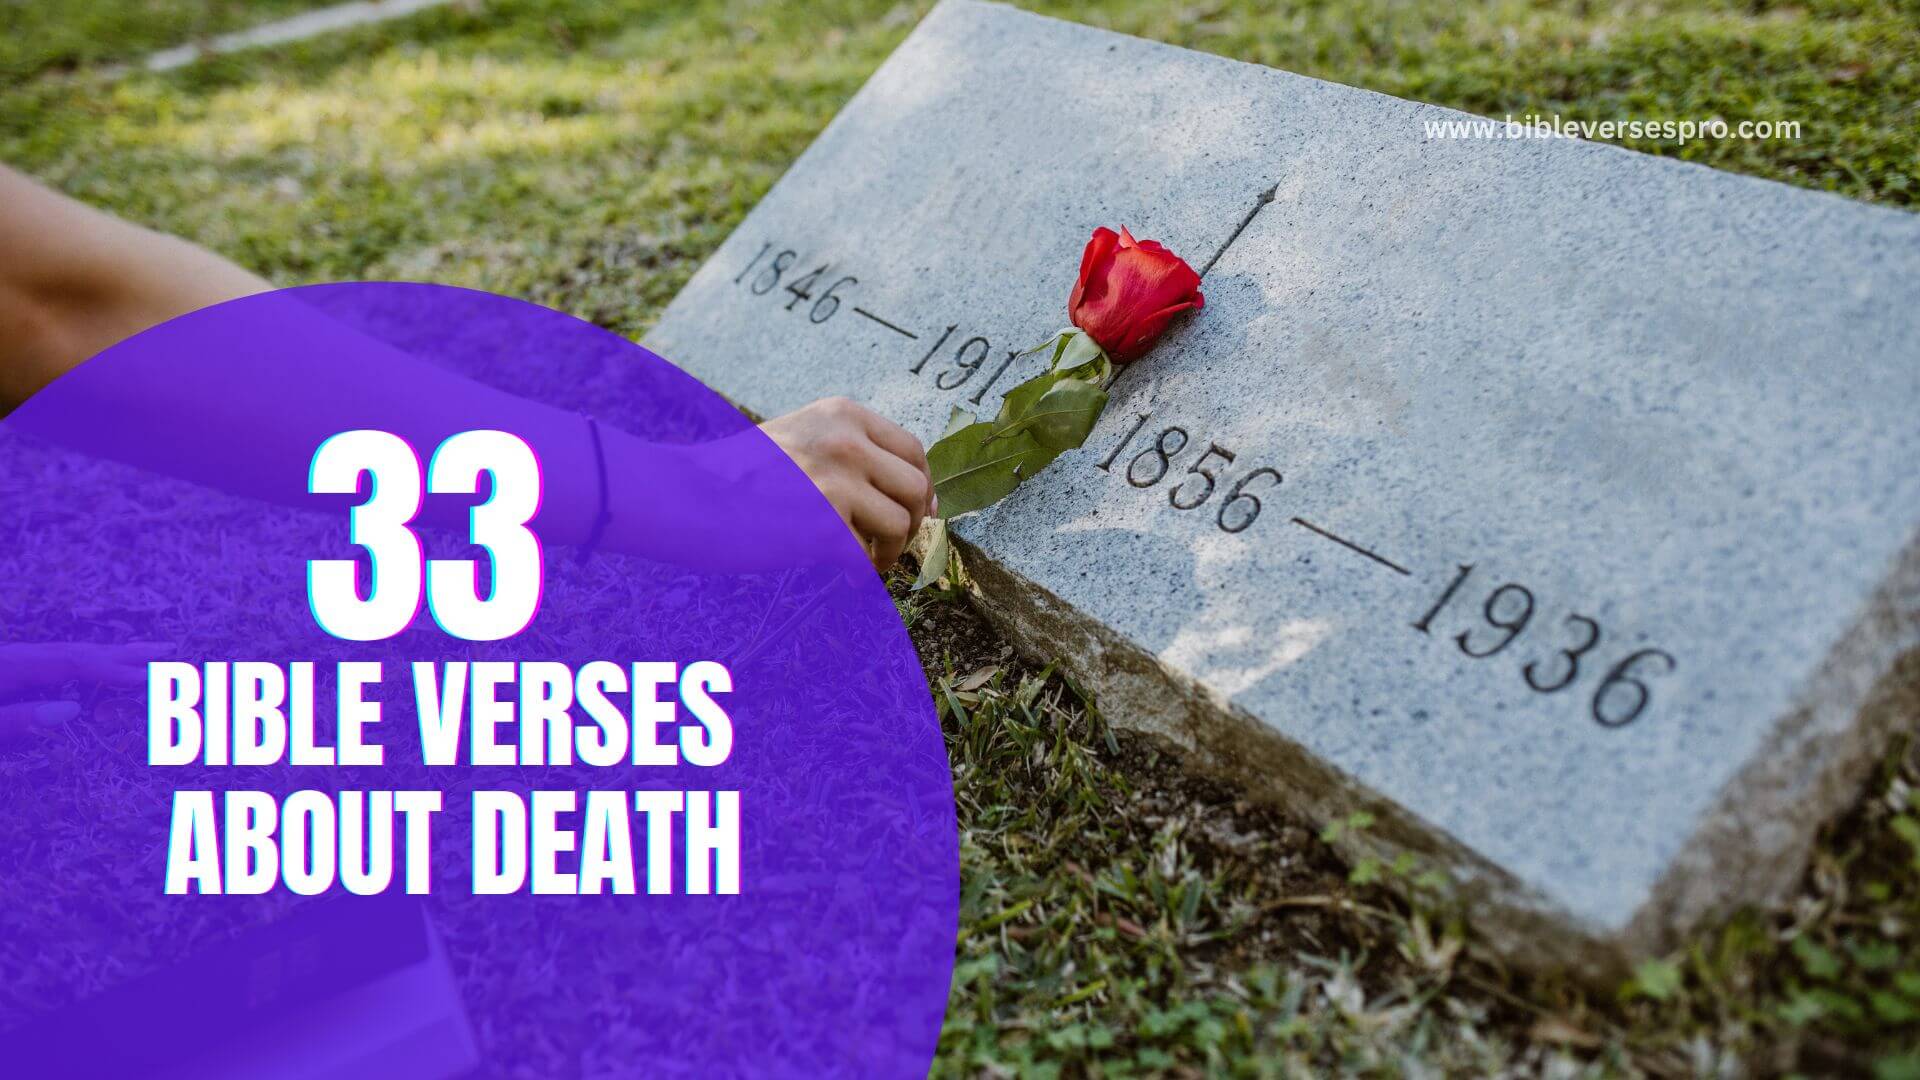 BIBLE VERSES ABOUT DEATH